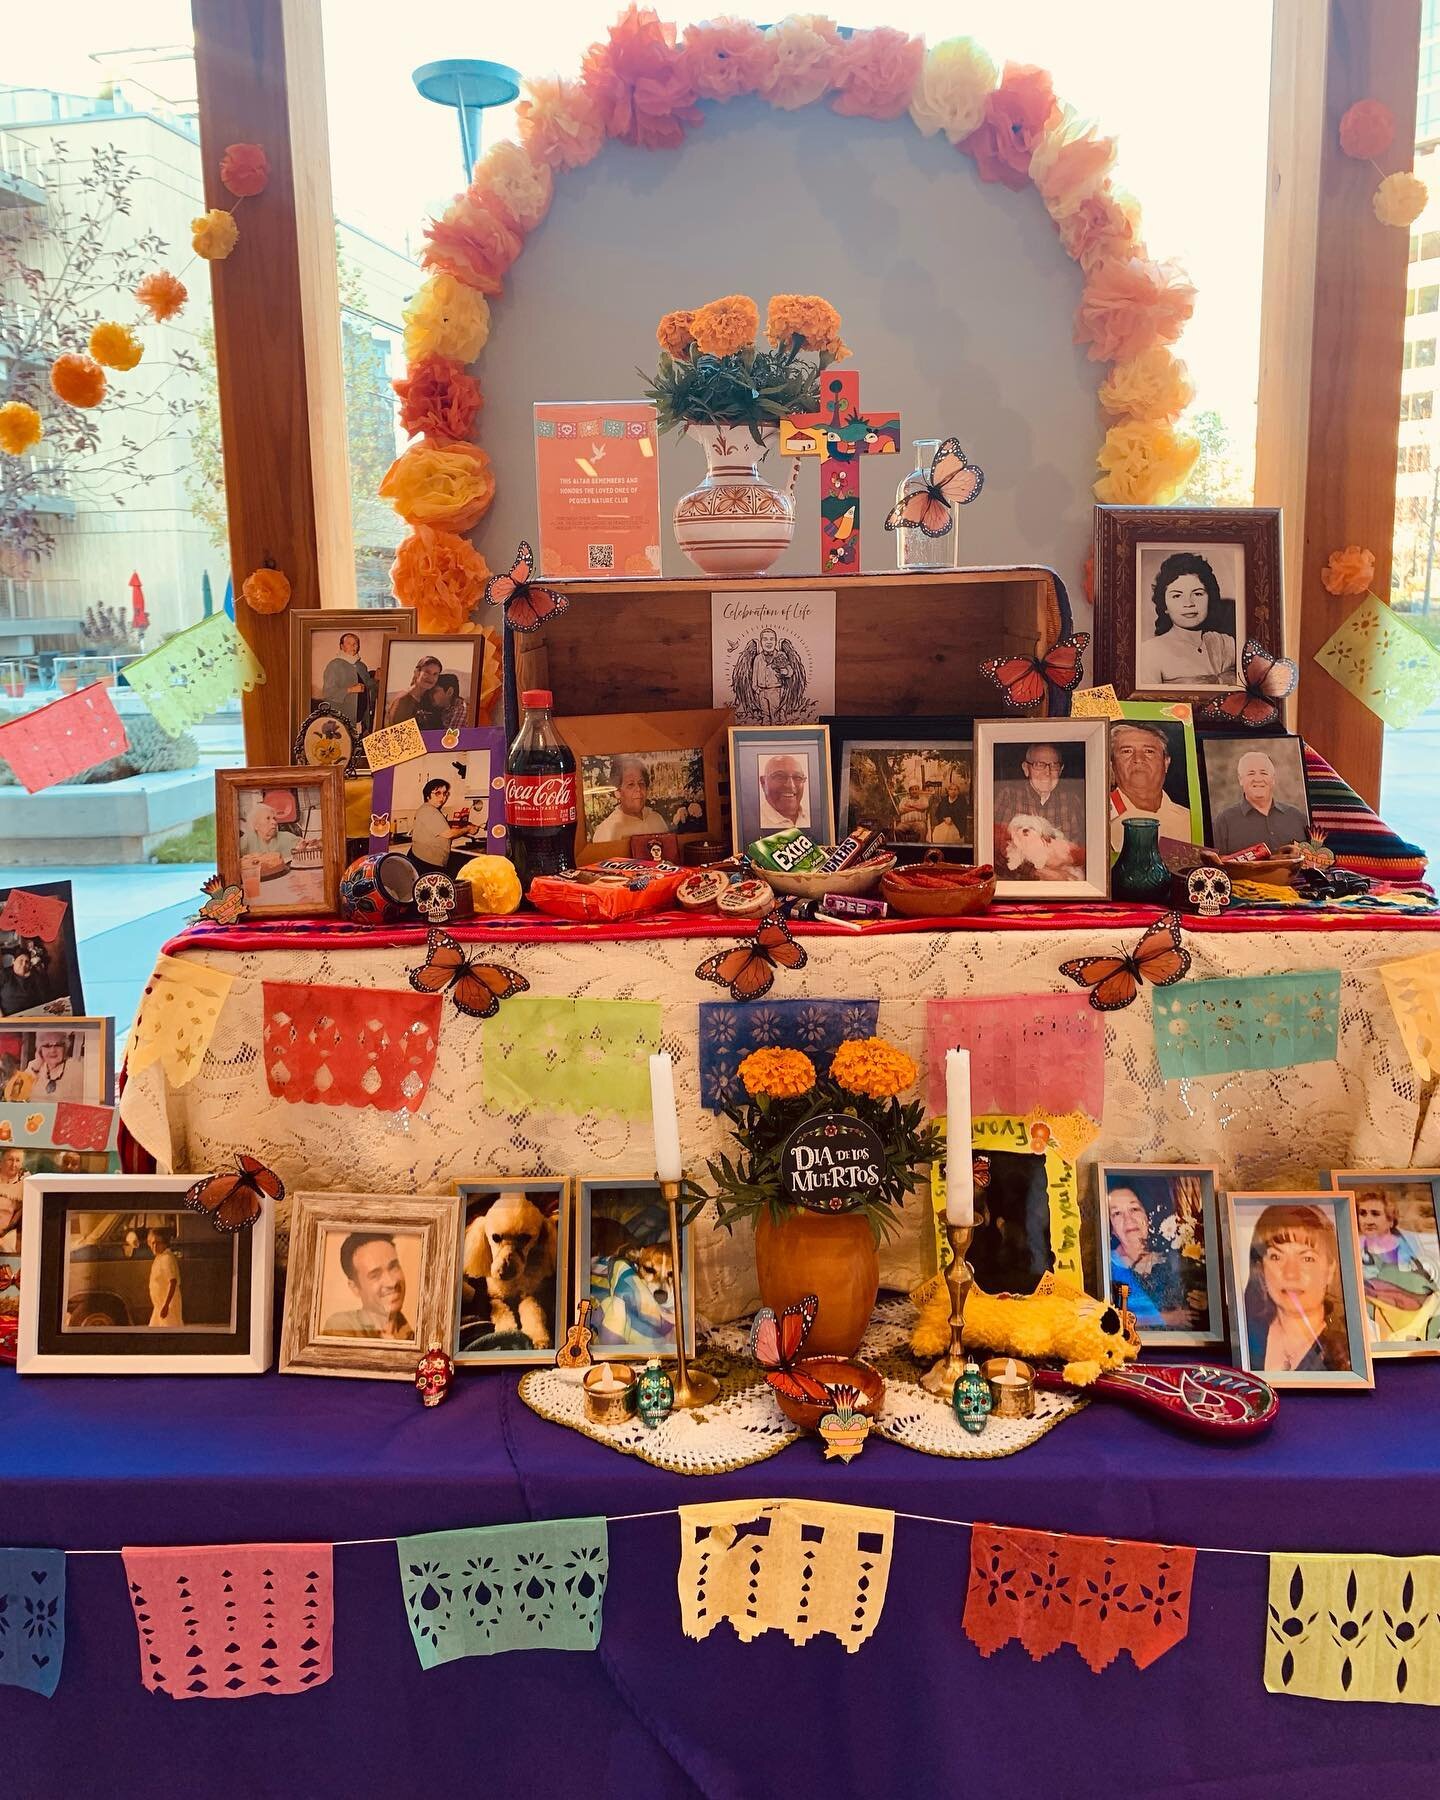 I had the honor of helping with the direction of putting this altar together. It celebrates family members from @pequesnatureclub. 

Death isn&rsquo;t easy to talk about it is sad &amp; painful. Even when you have faith in life after death, in heaven